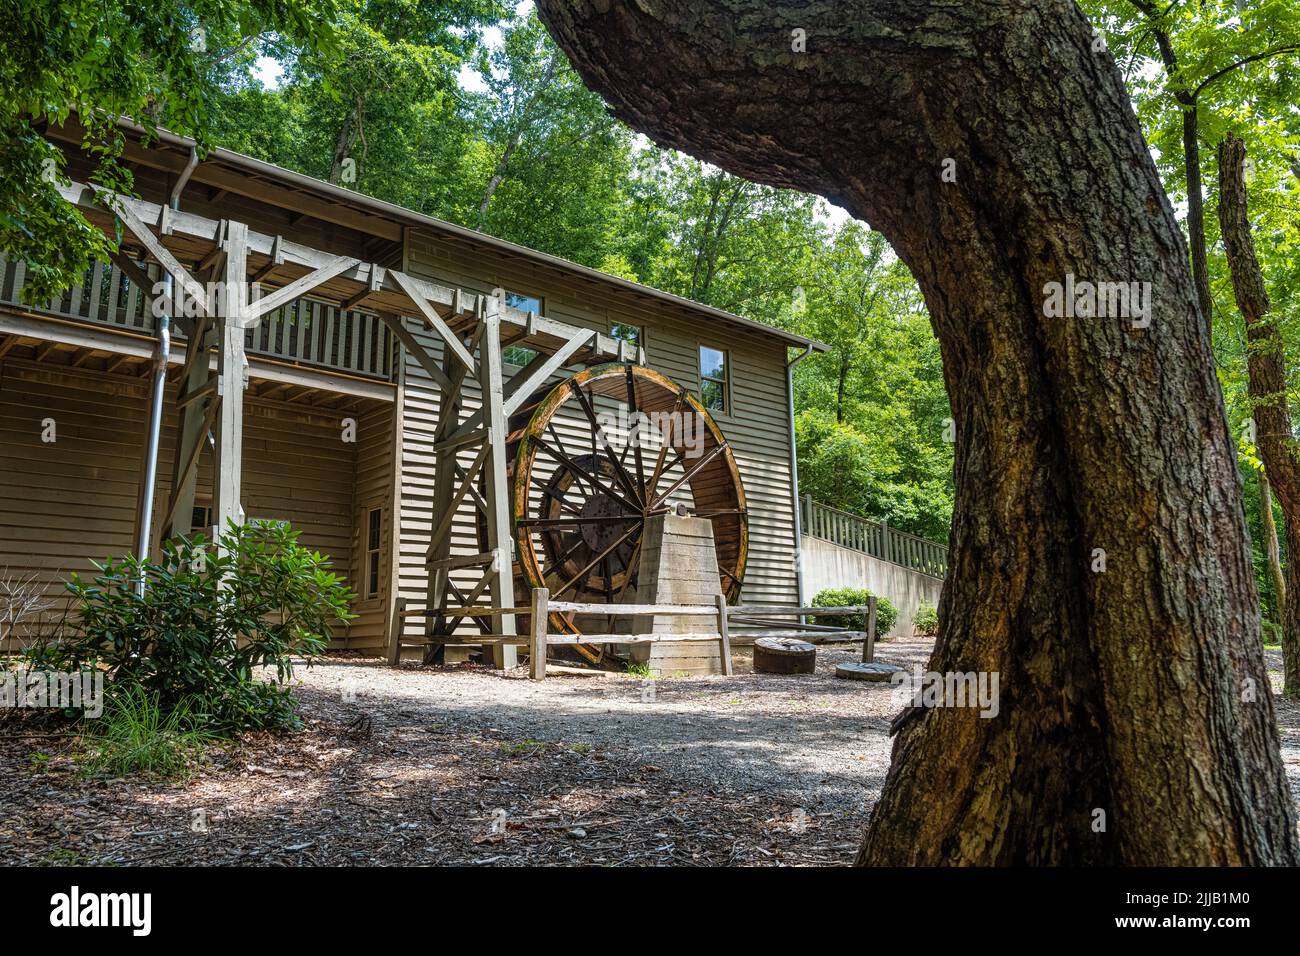 Restored grist mill and waterwheel at Meeks Park in Blairsville, a scenic town in Georgia's Blue Ridge Mountains. (USA) Stock Photo